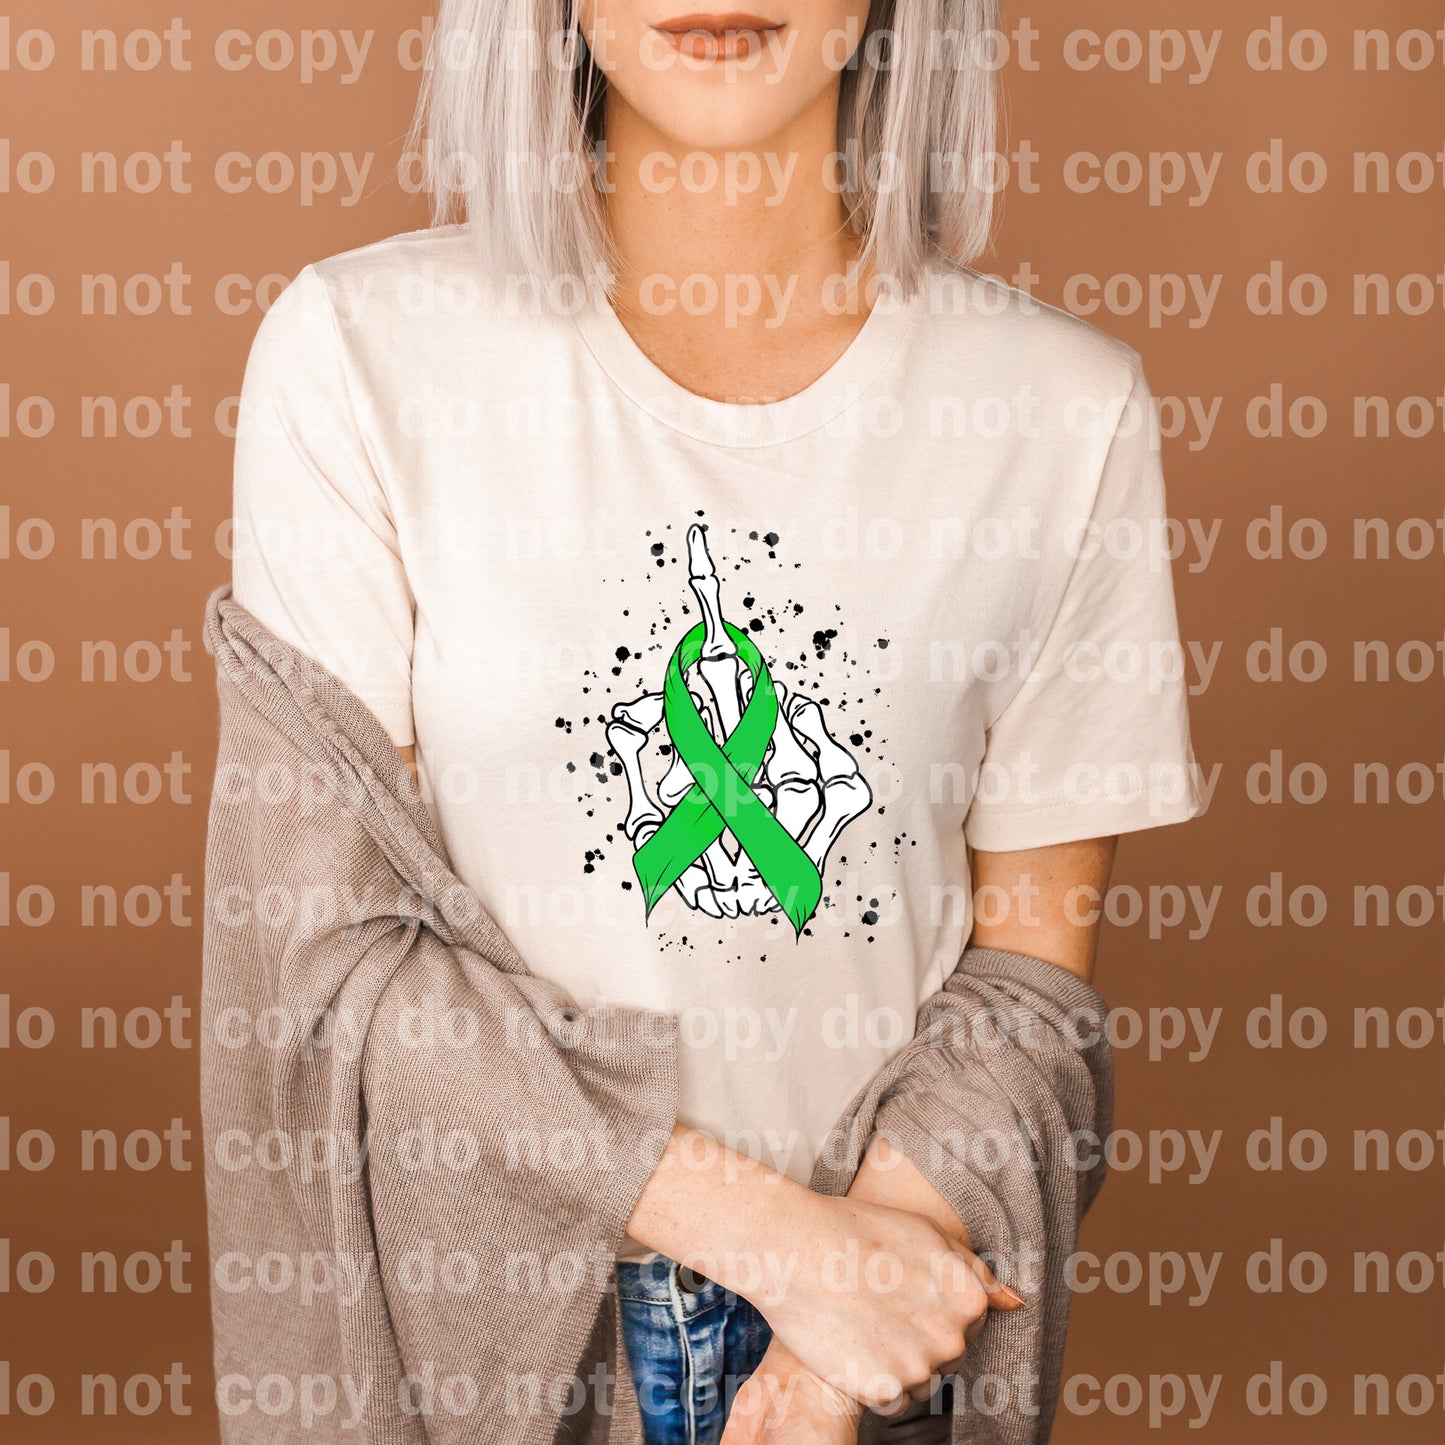 Green Cancer Ribbon Dream Print or Sublimation Print